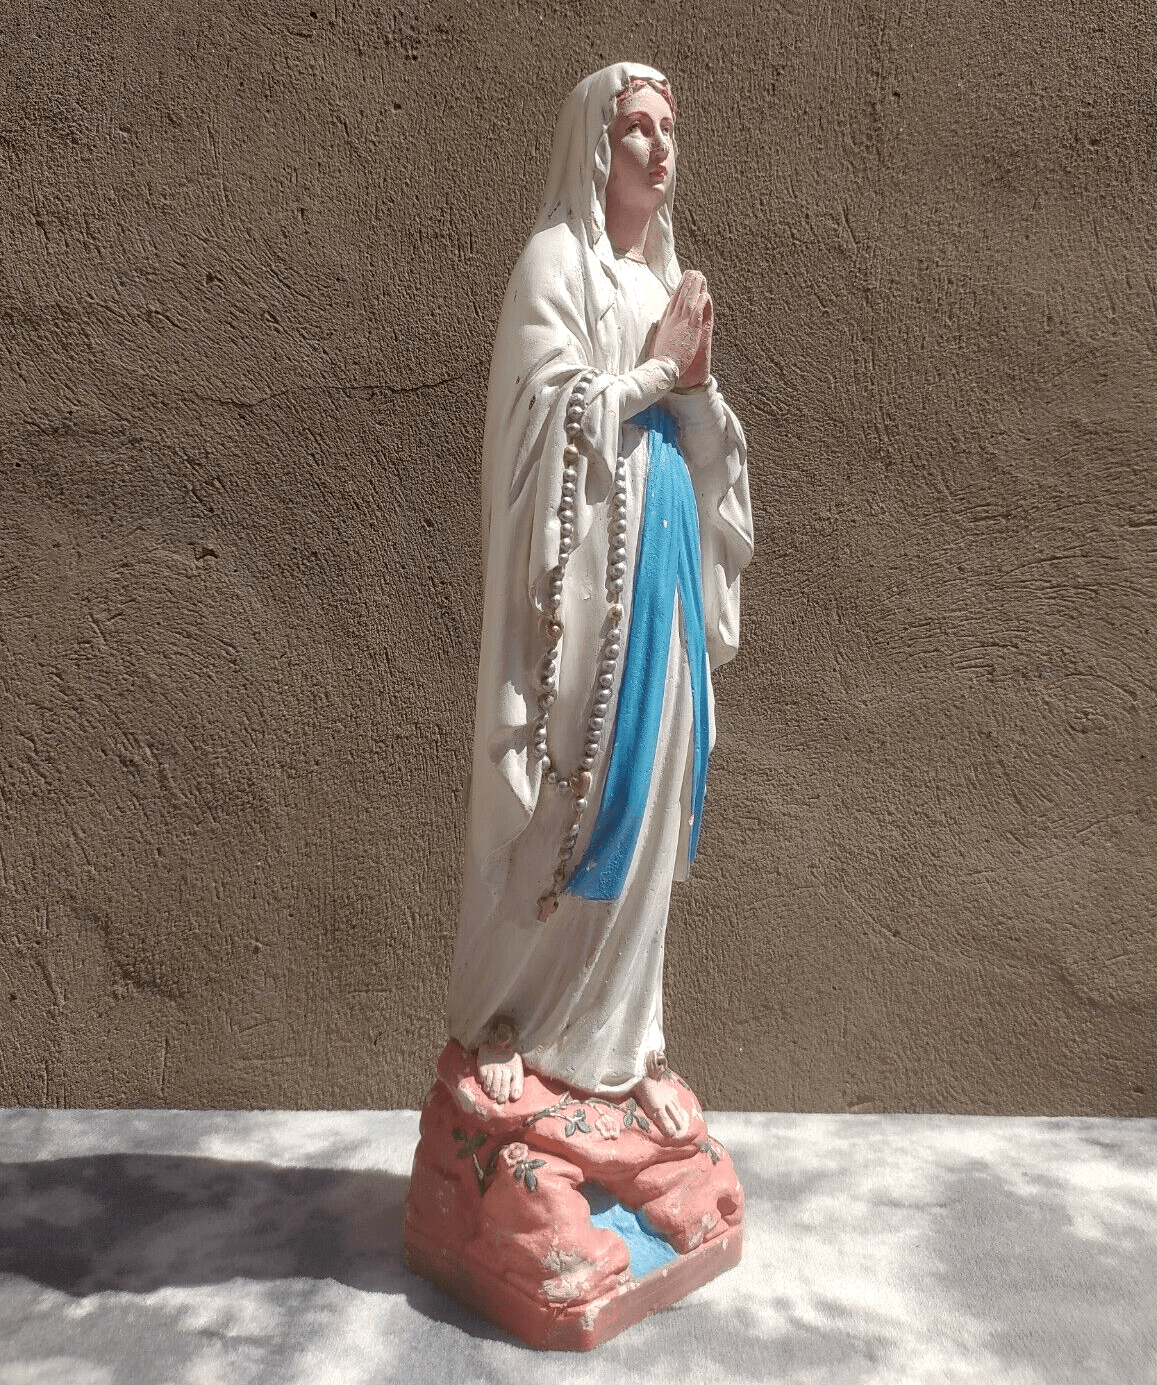 French 20th Century Plaster Chalkware Virgin Mary Figure signed Corneille Toulouse - Tommy's Treasure